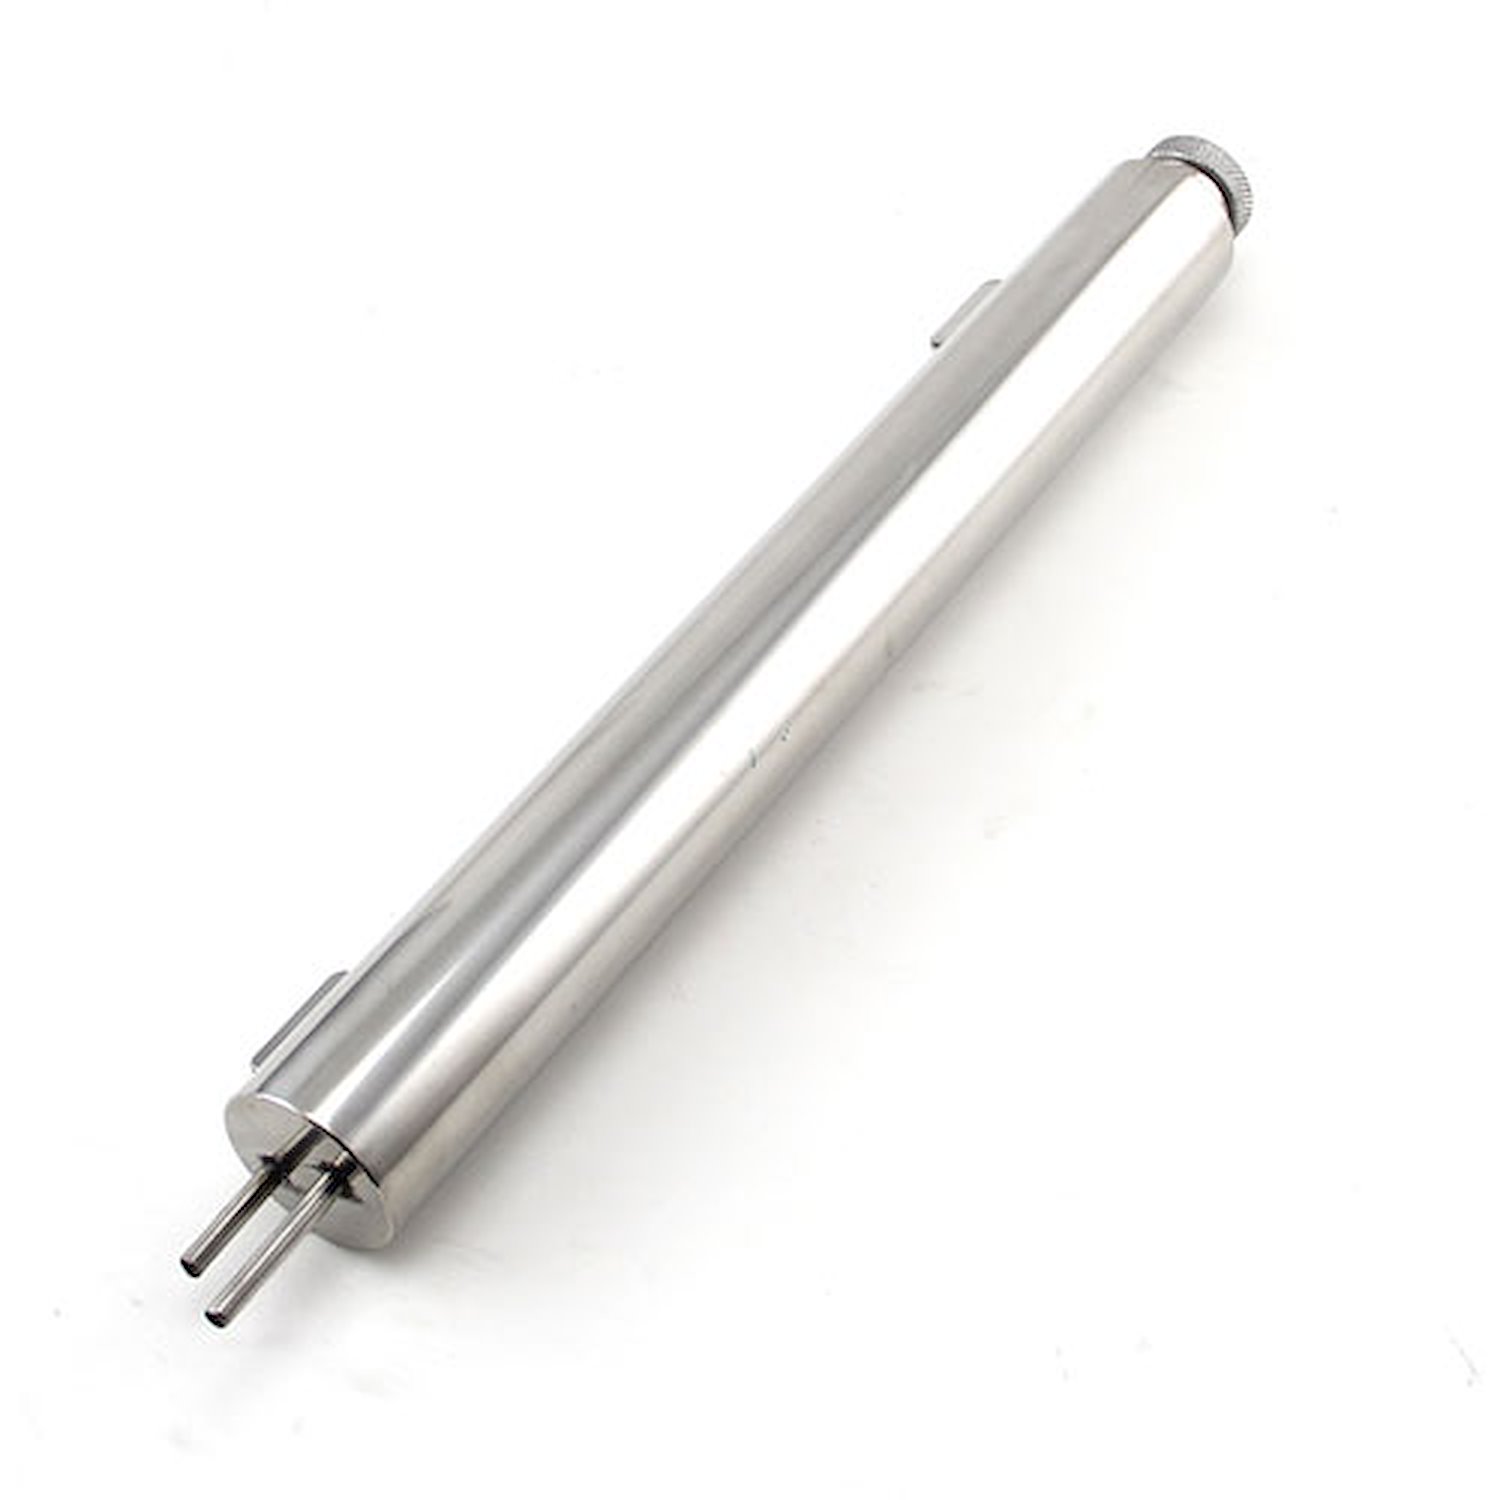 2 x 18 Stainless Steel Overflow Tank With Mounting Bracket Kit